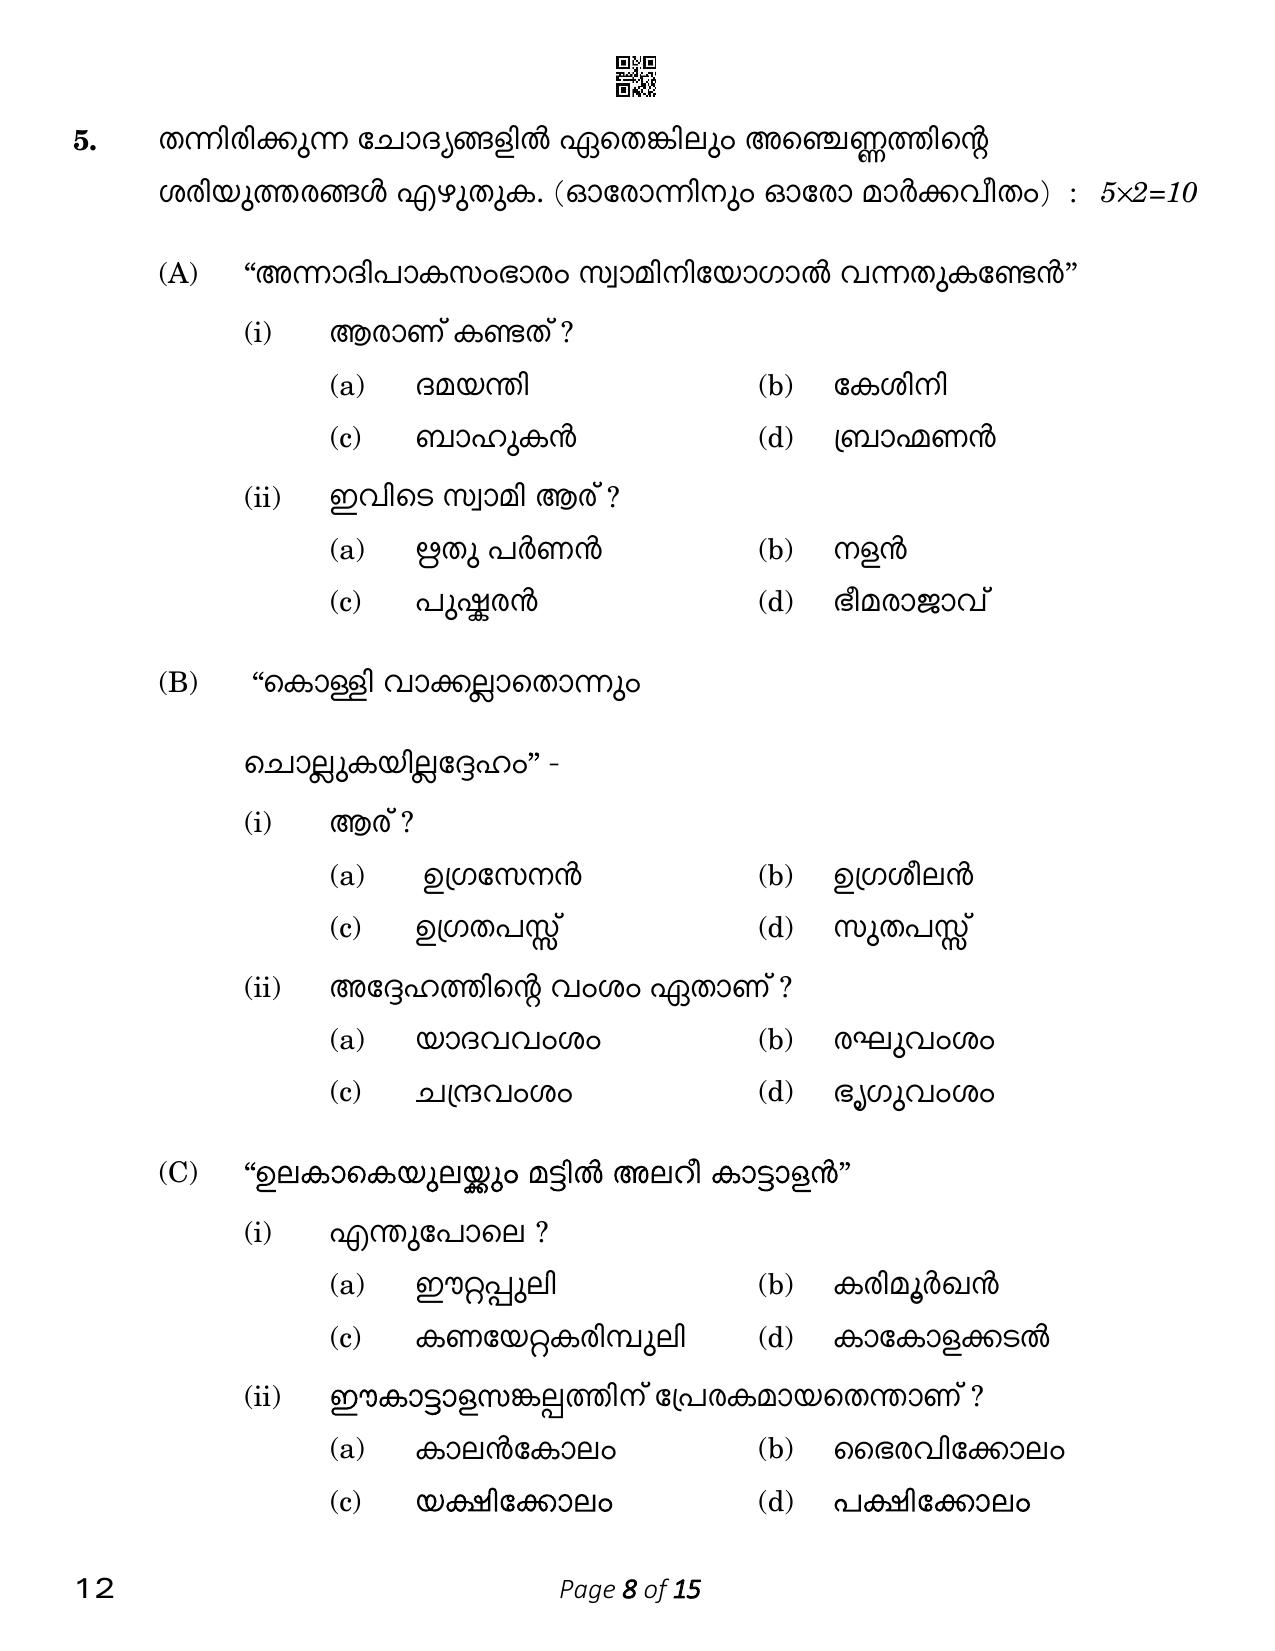 CBSE Class 12 Malayalam (Compartment) 2023 Question Paper - Page 8